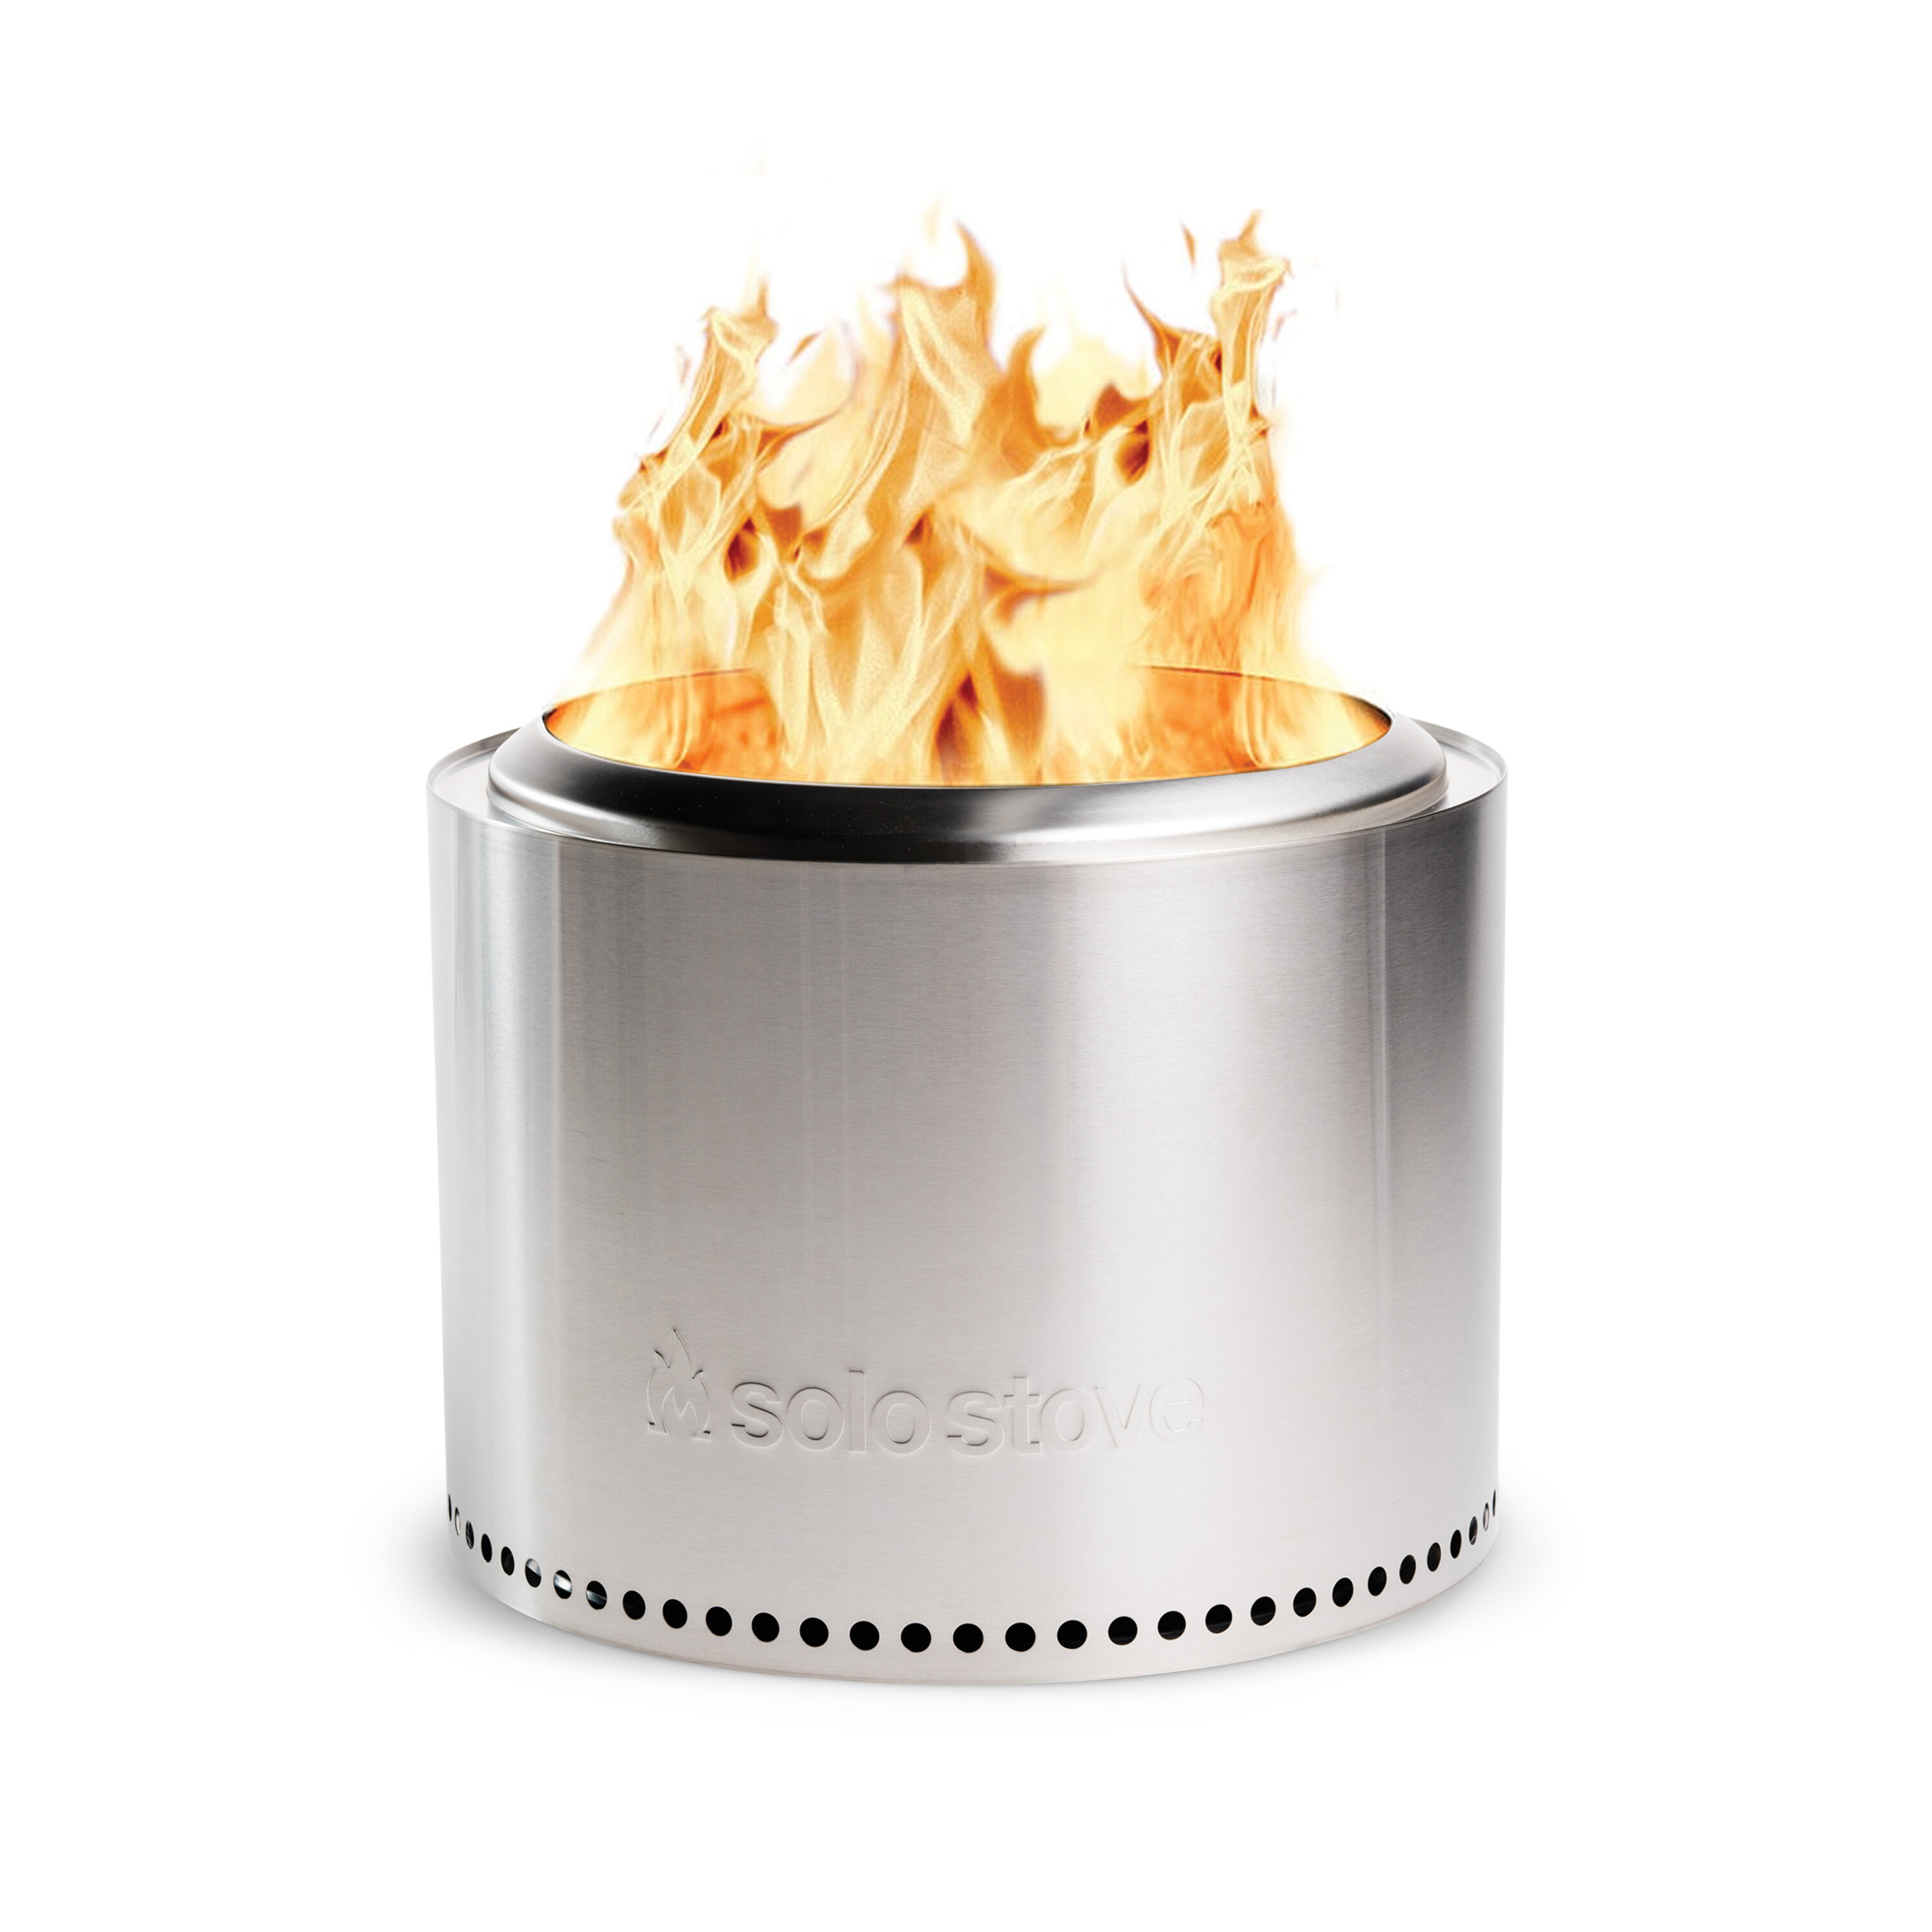 Solo Stove Bonfire Stainless Steel Wood Burning Fire Pit & Reviews | Wayfair